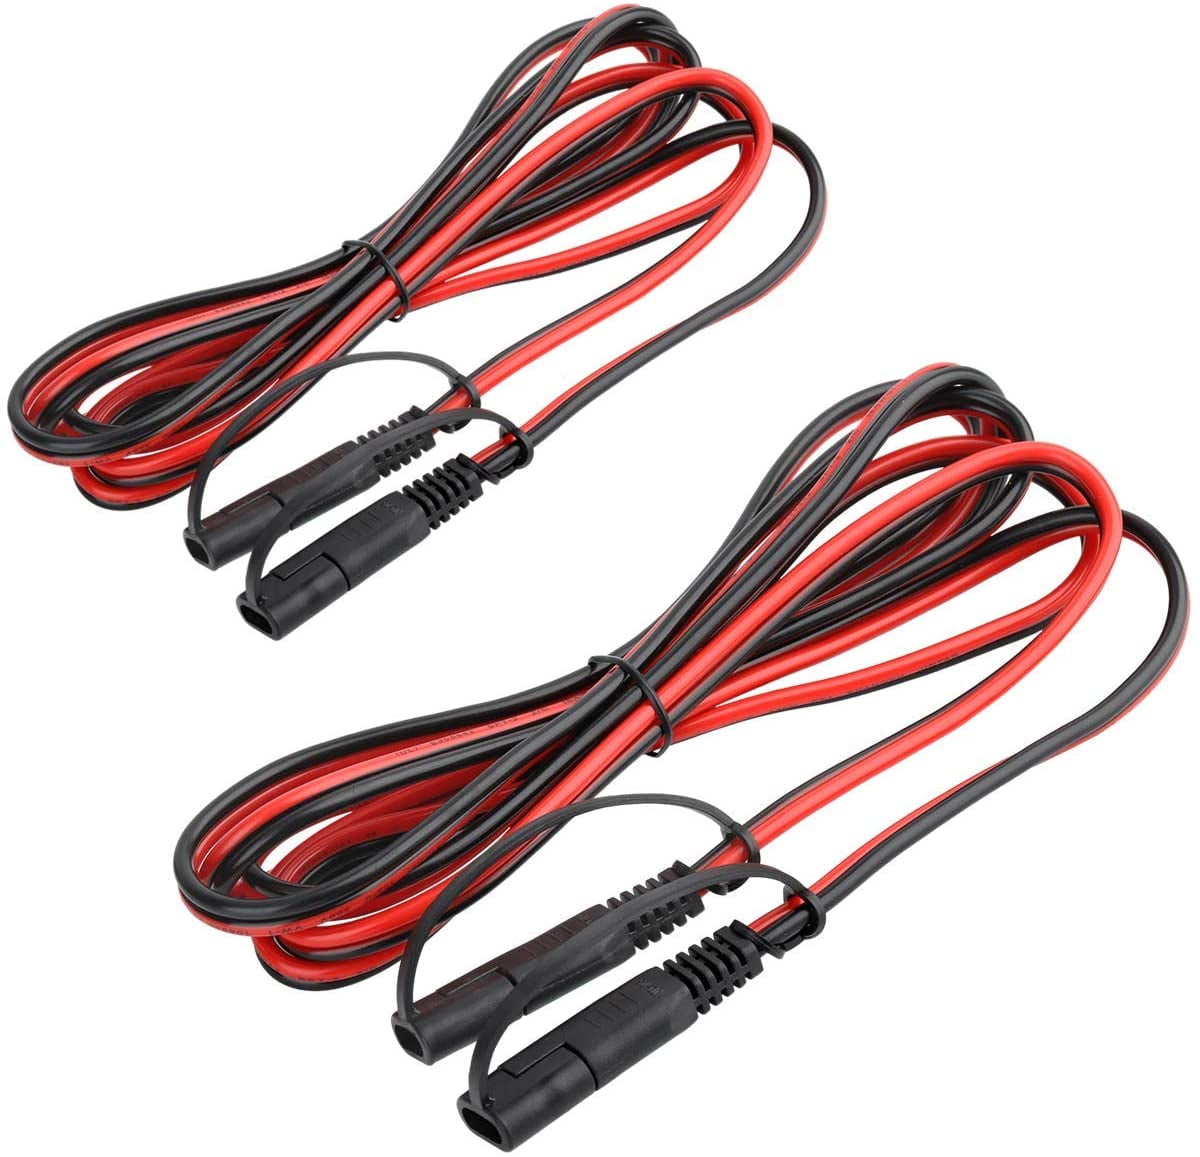 iMESTOU 2PCS 16AWG SAE Power Automotive Extension Cable 2 Pin Quick Disconnect DC Connector Cord Plug 12V 30CM with Waterproof Cap for Motorcycle Car Battery Jump Starter Solar Application 